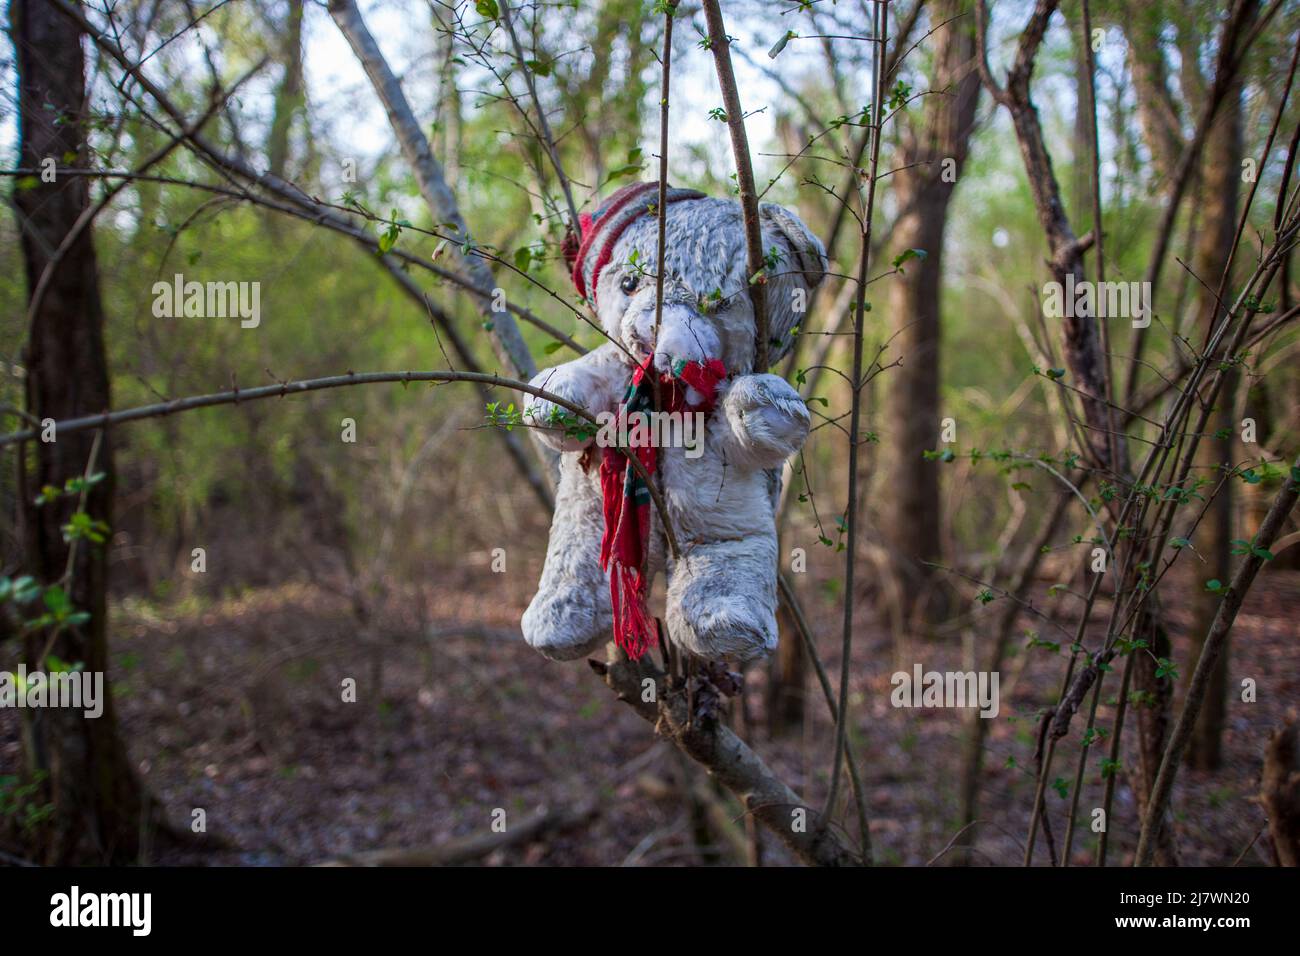 Dirty Stuffed teddy bear left in the forest to decay. Stock Photo